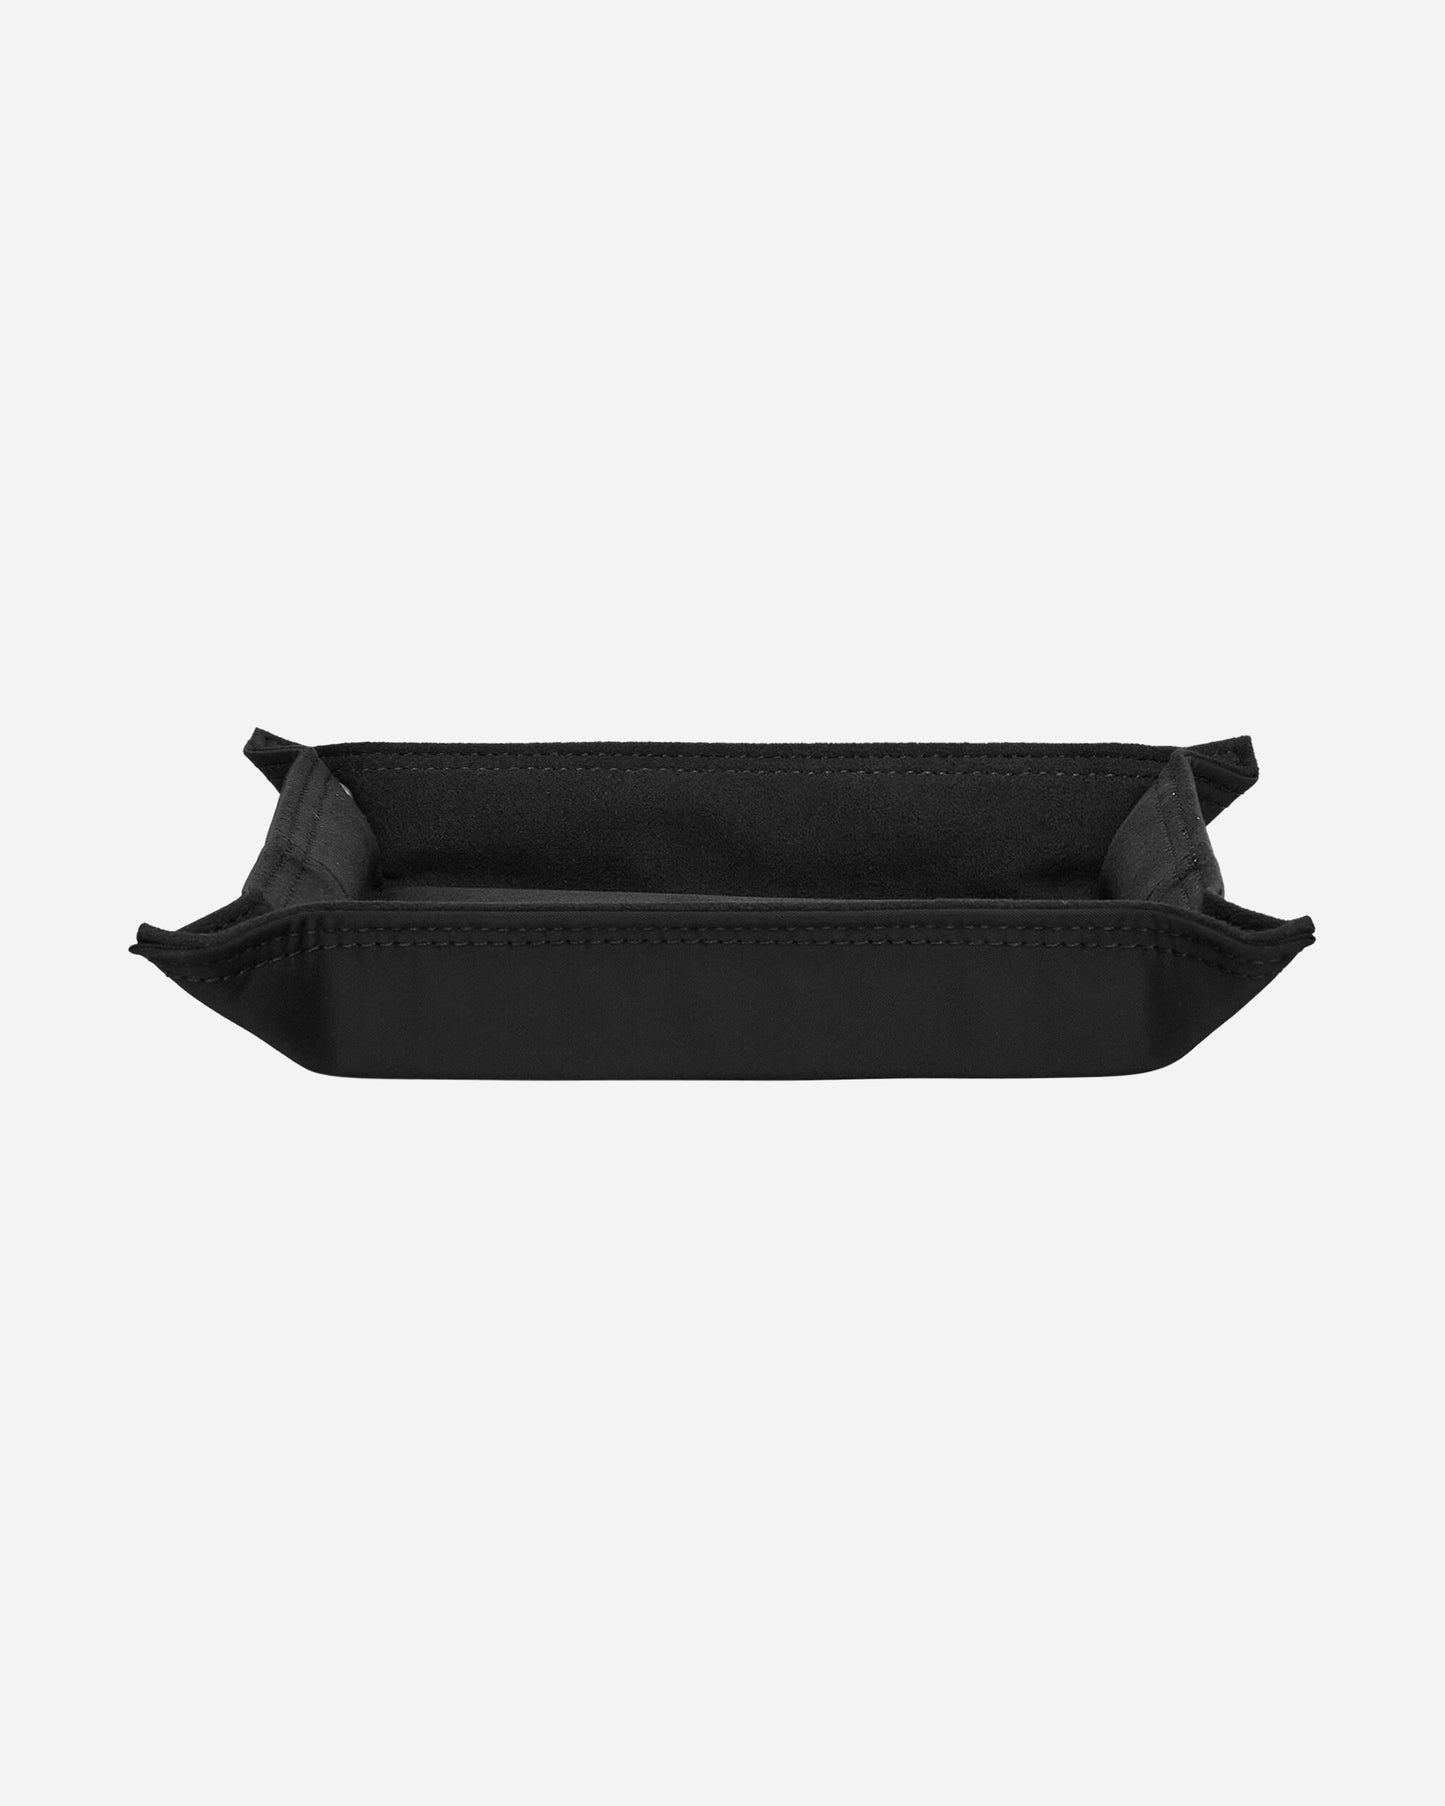 Ramidus Tray (L) Black Tableware Dishes and Trays B011101 001